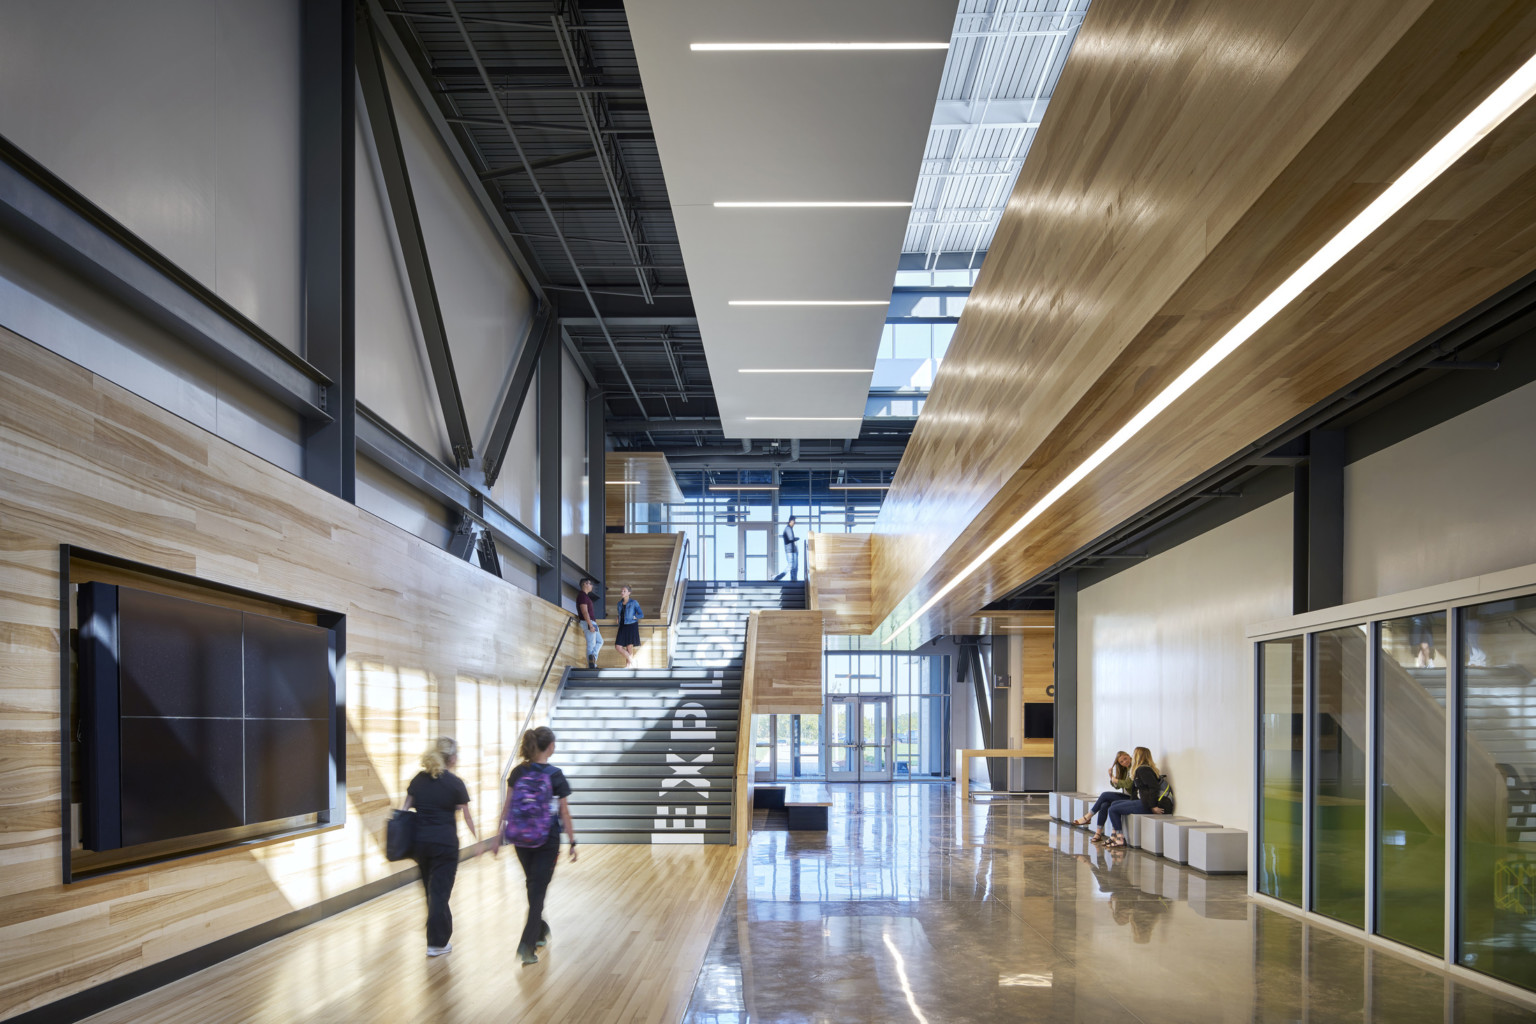 Missouri Innovation Campus interior hallway facing double height glass windows at entry and black staircase with wood walls